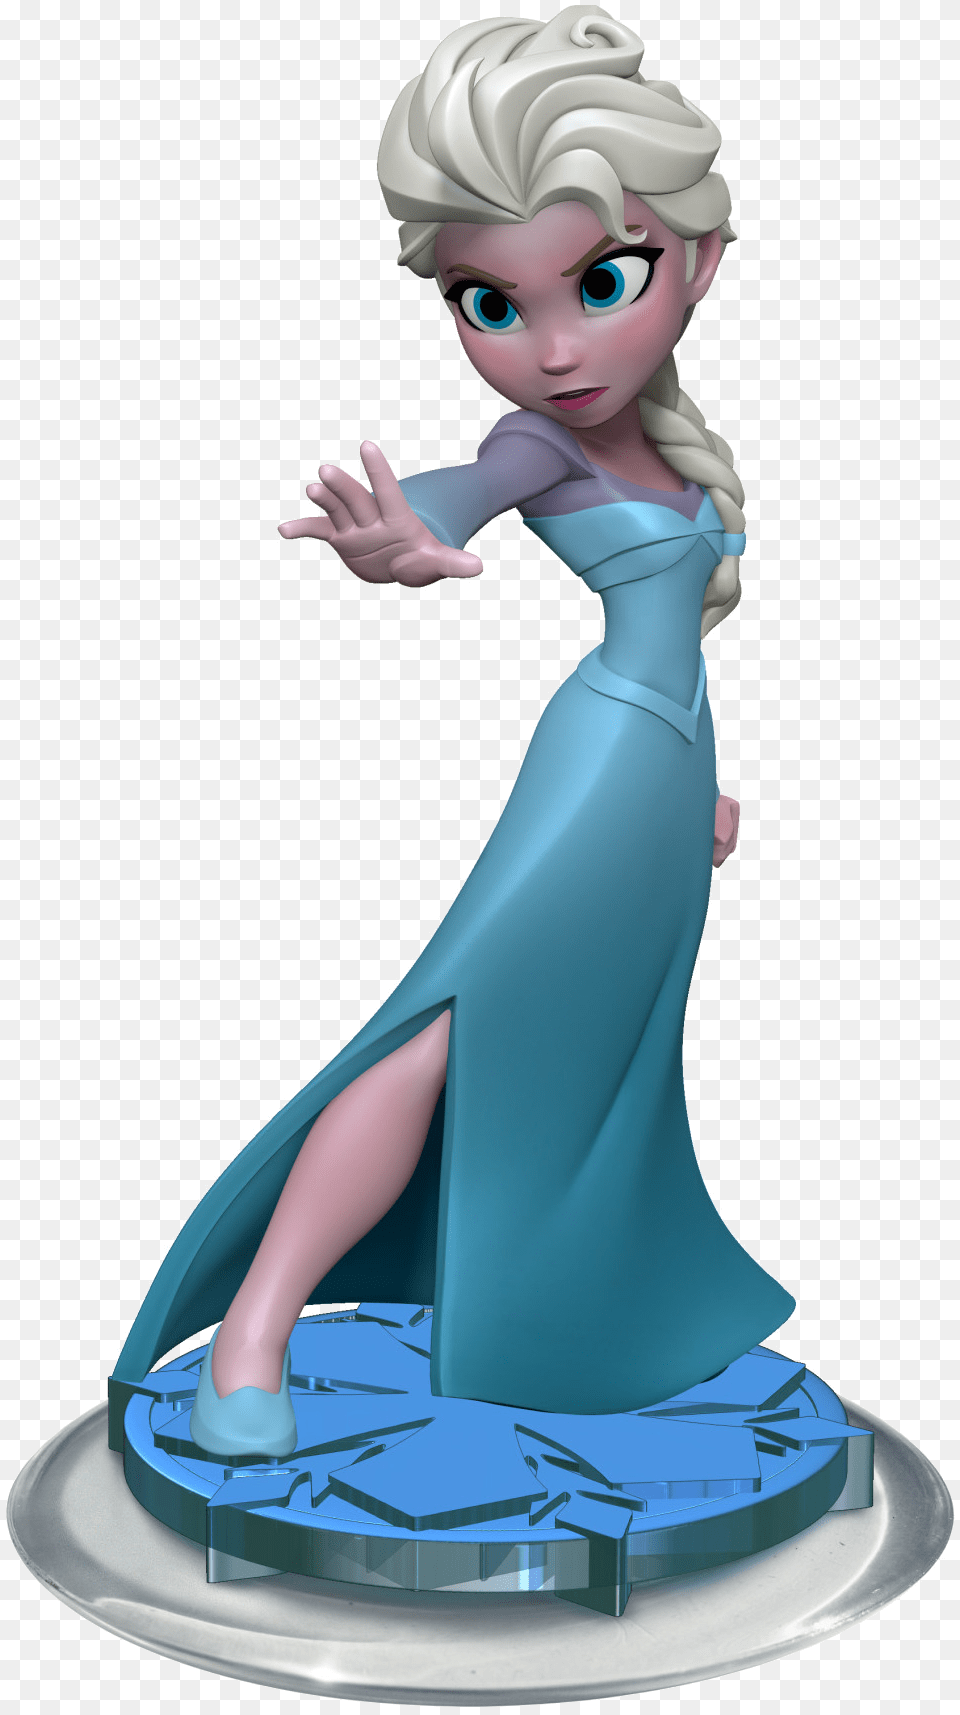 Clothing, Dress, Figurine, Doll Png Image